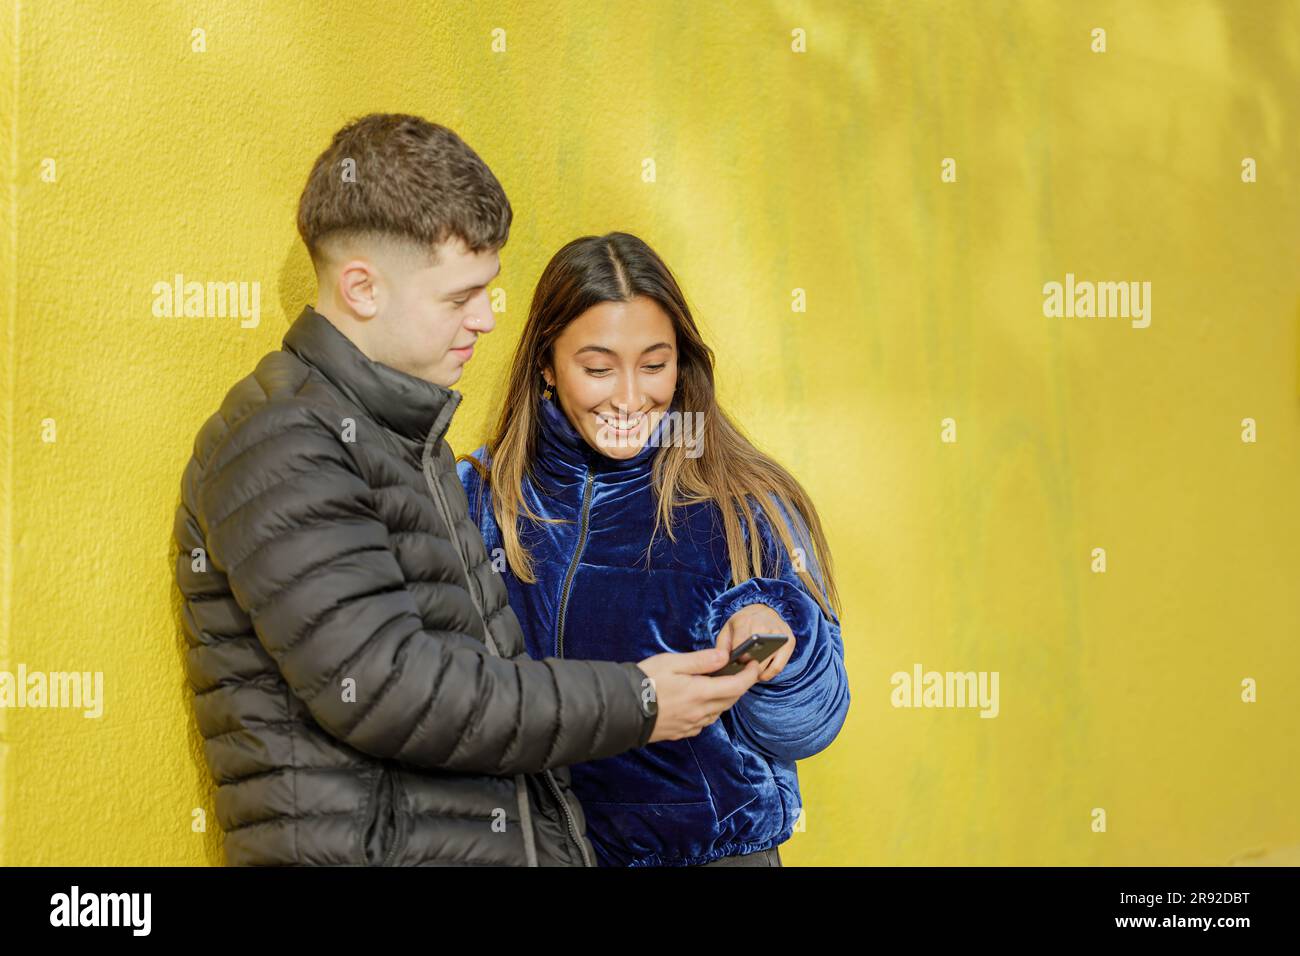 Young couple look at a mobile phone with a yellow wall in the background with copy space. Stock Photo